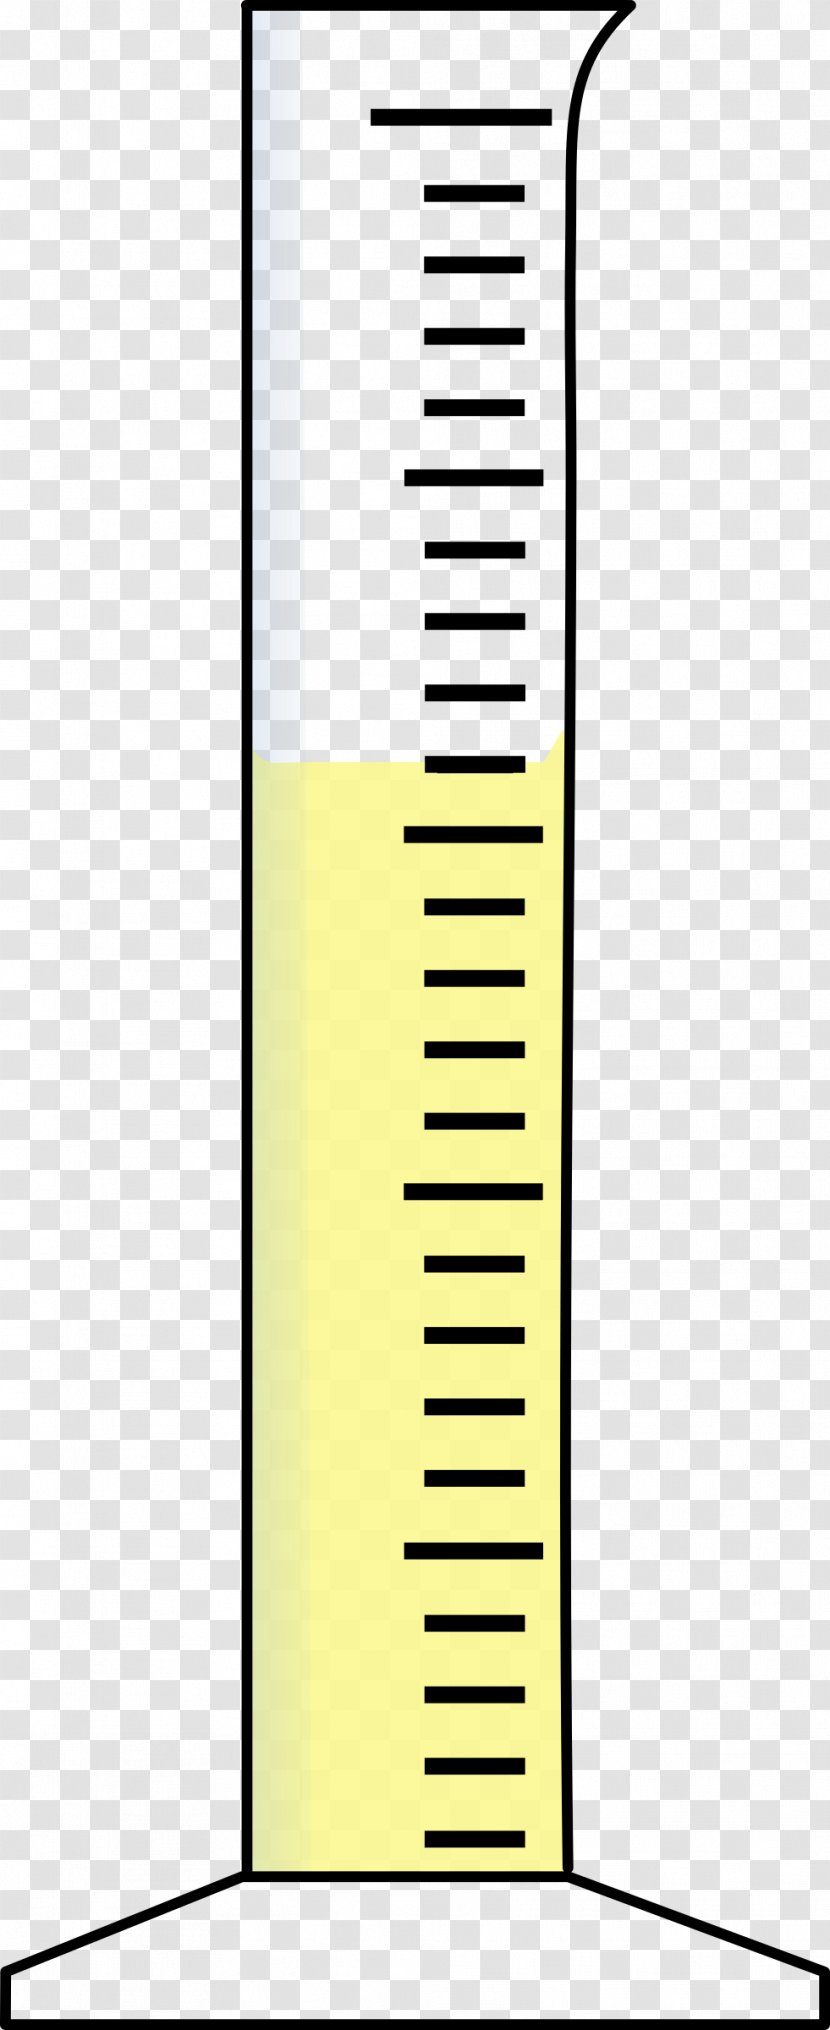 Graduated Cylinders Liquid Chemistry Laboratory Density - Yellow Transparent PNG